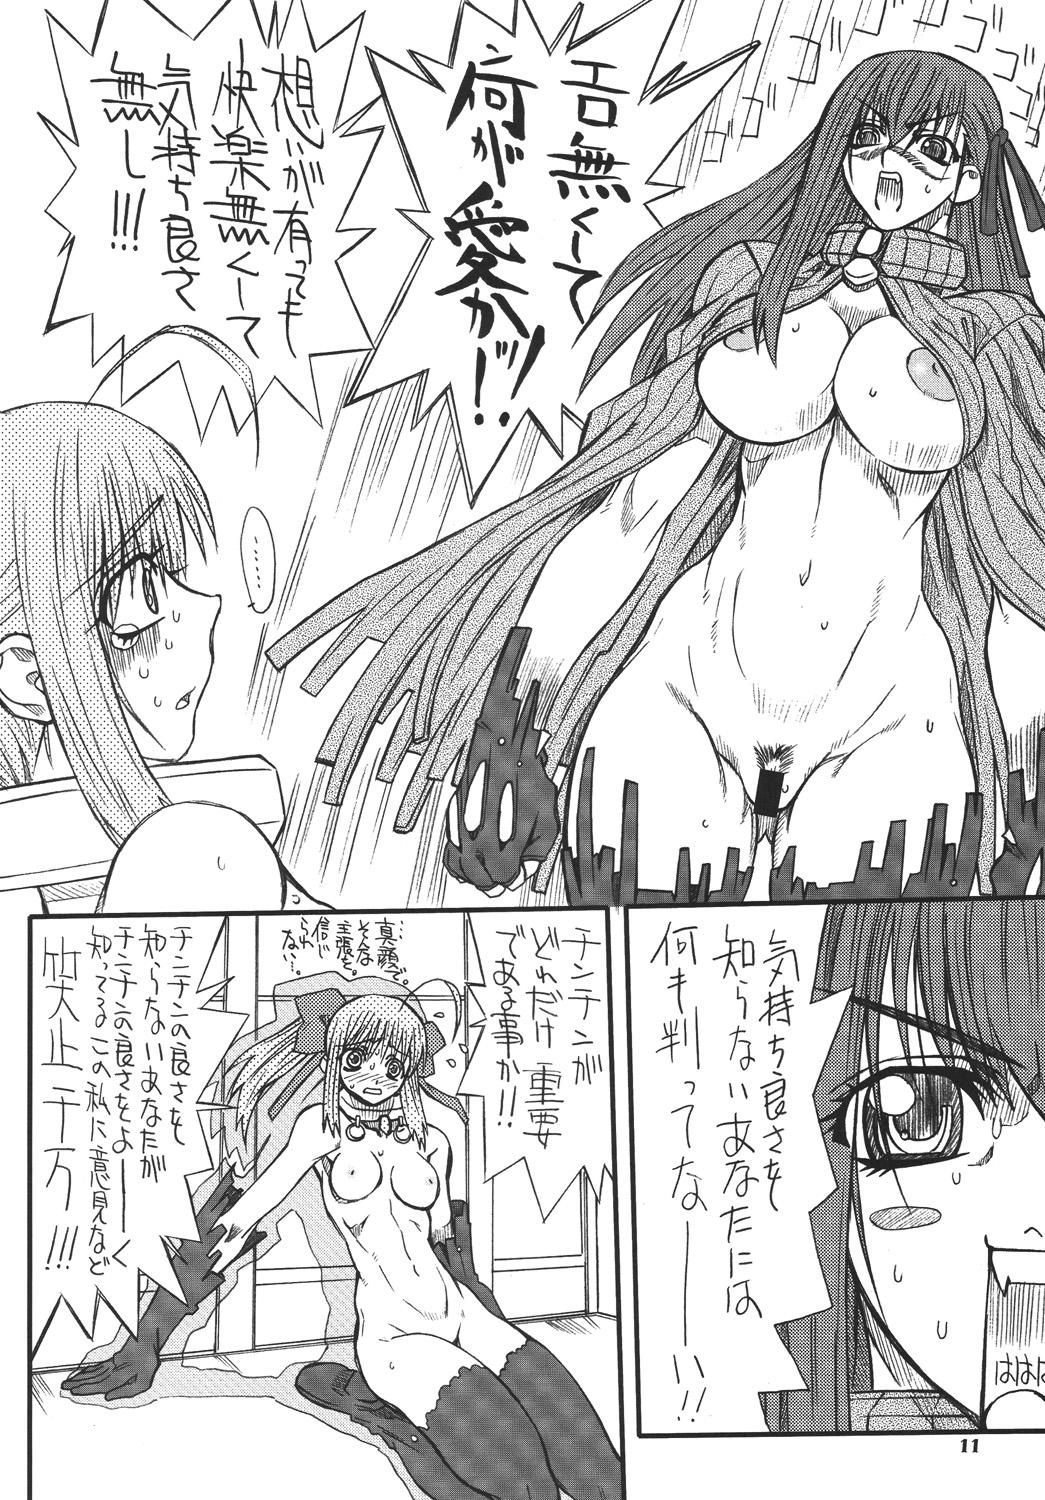 Jerkoff Akihime Yon - Fate stay night Flagra - Page 10